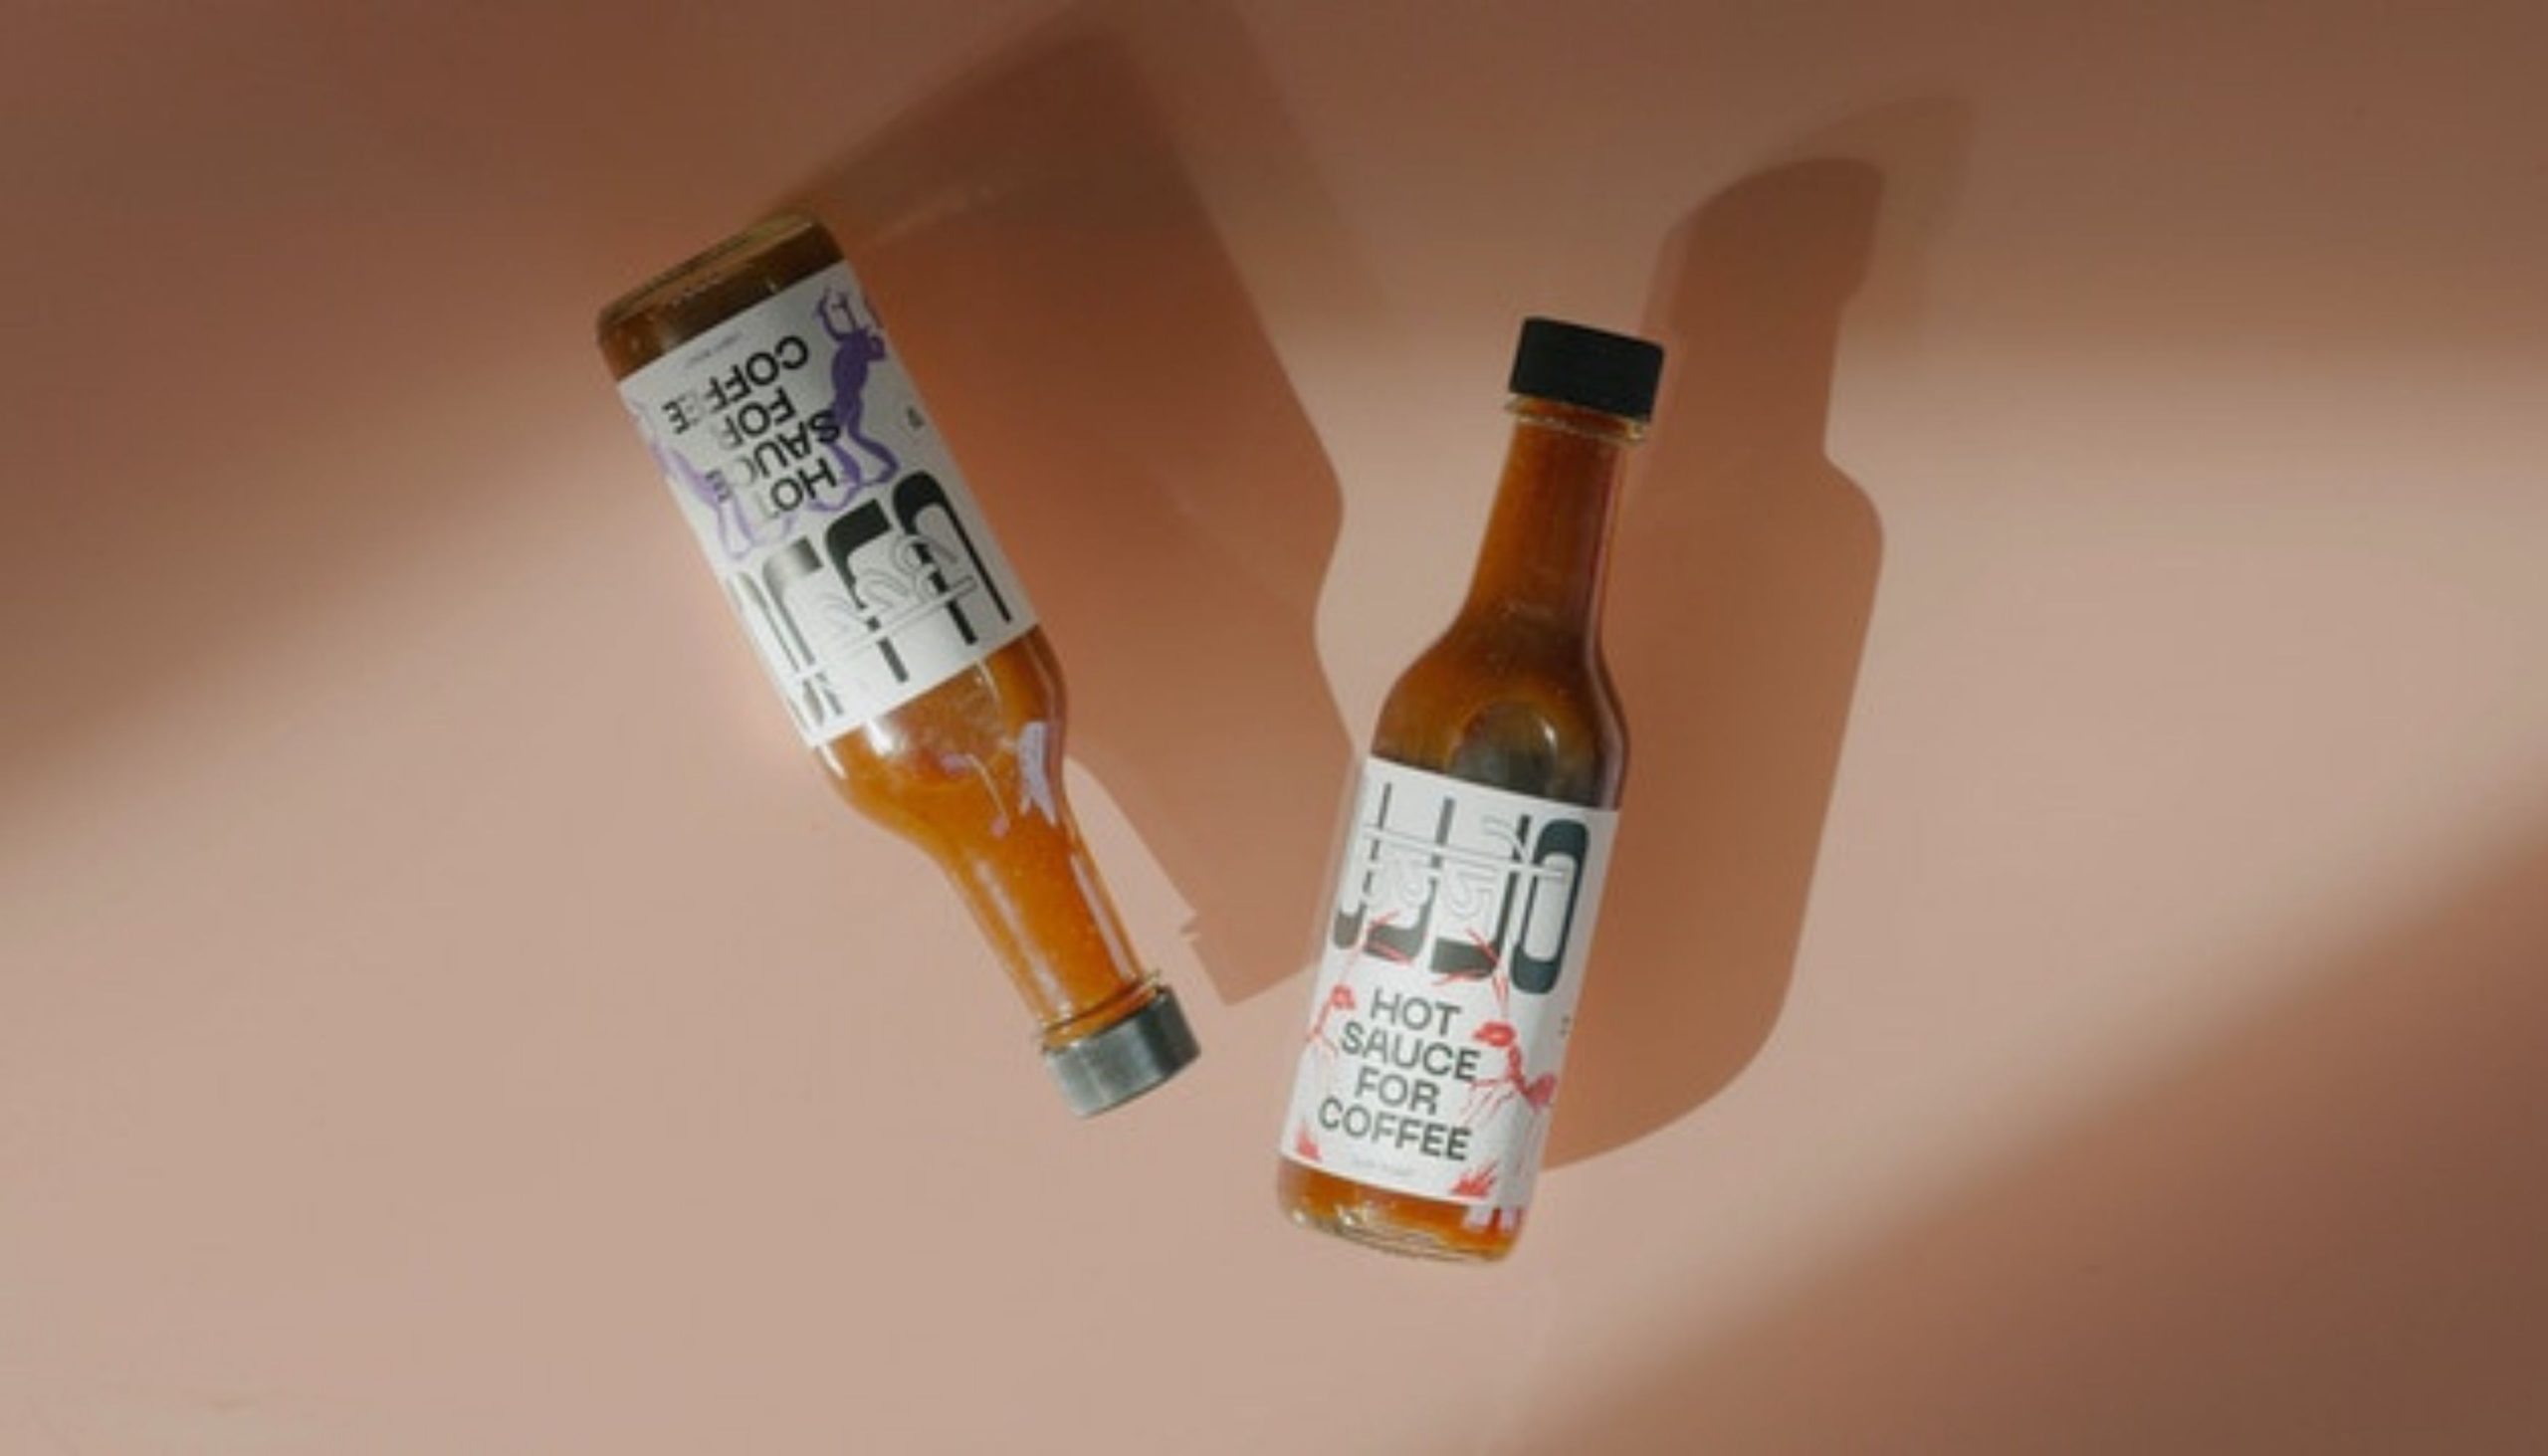 Only in America! (Part 2) Meet Ujjo, the World's first Hot Sauce for Coffee